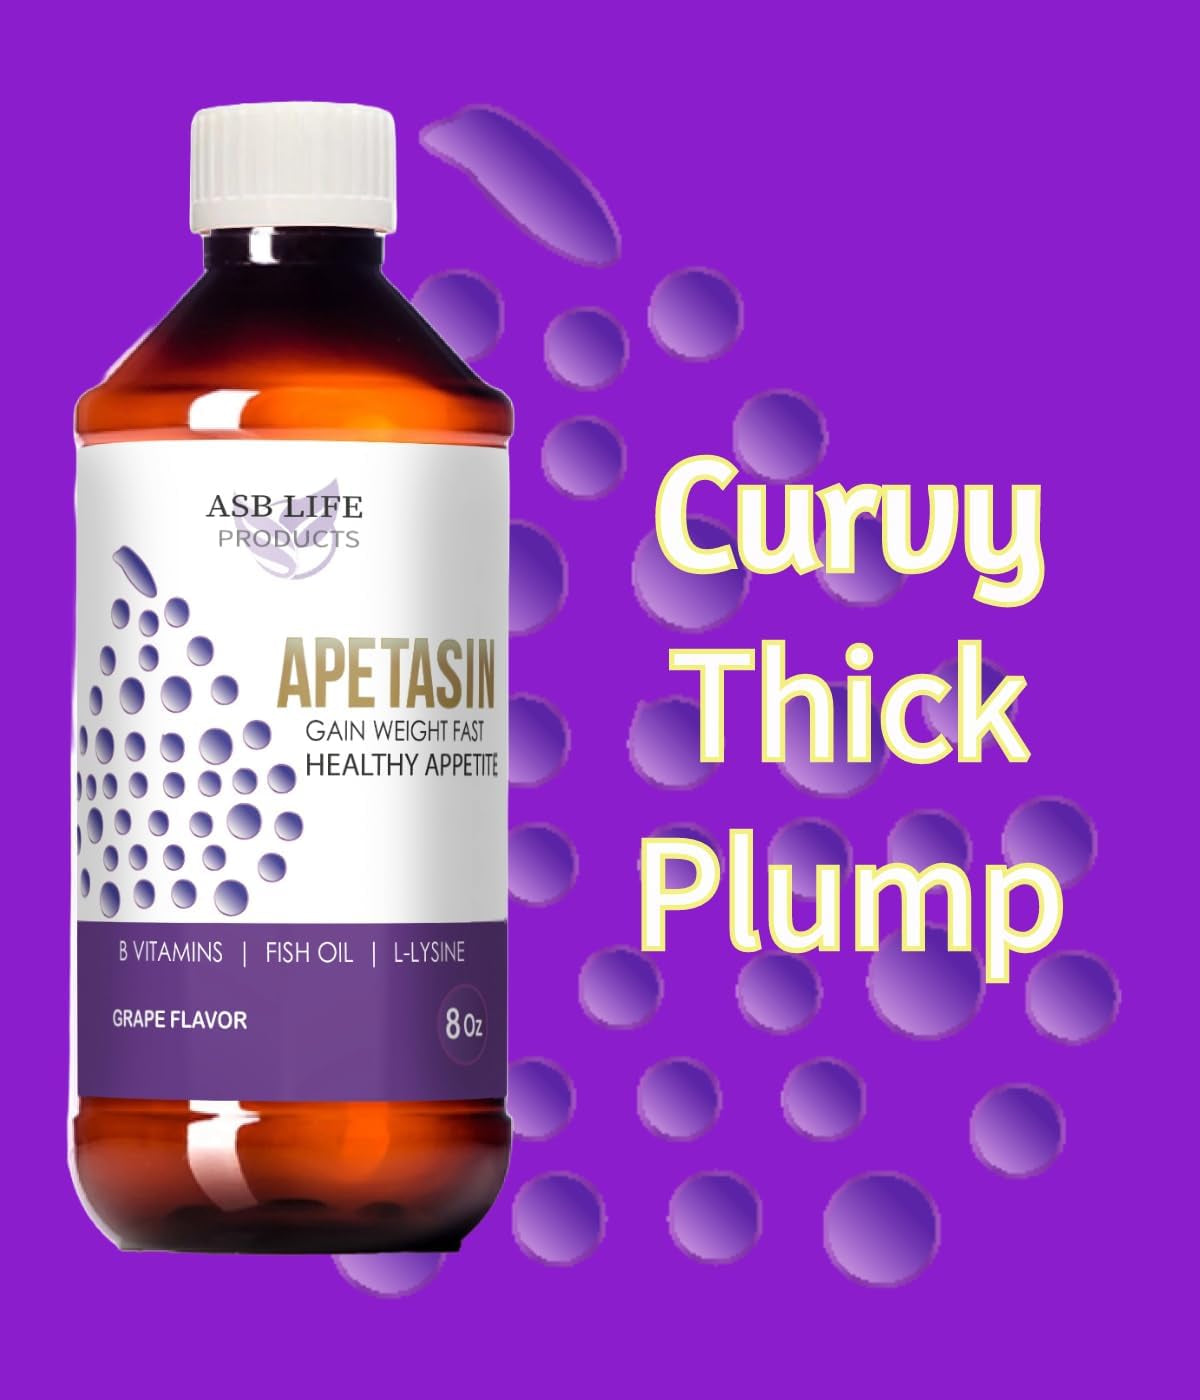 "Apetasin Blended Multivitamin and Minerals with Booty Building Support"